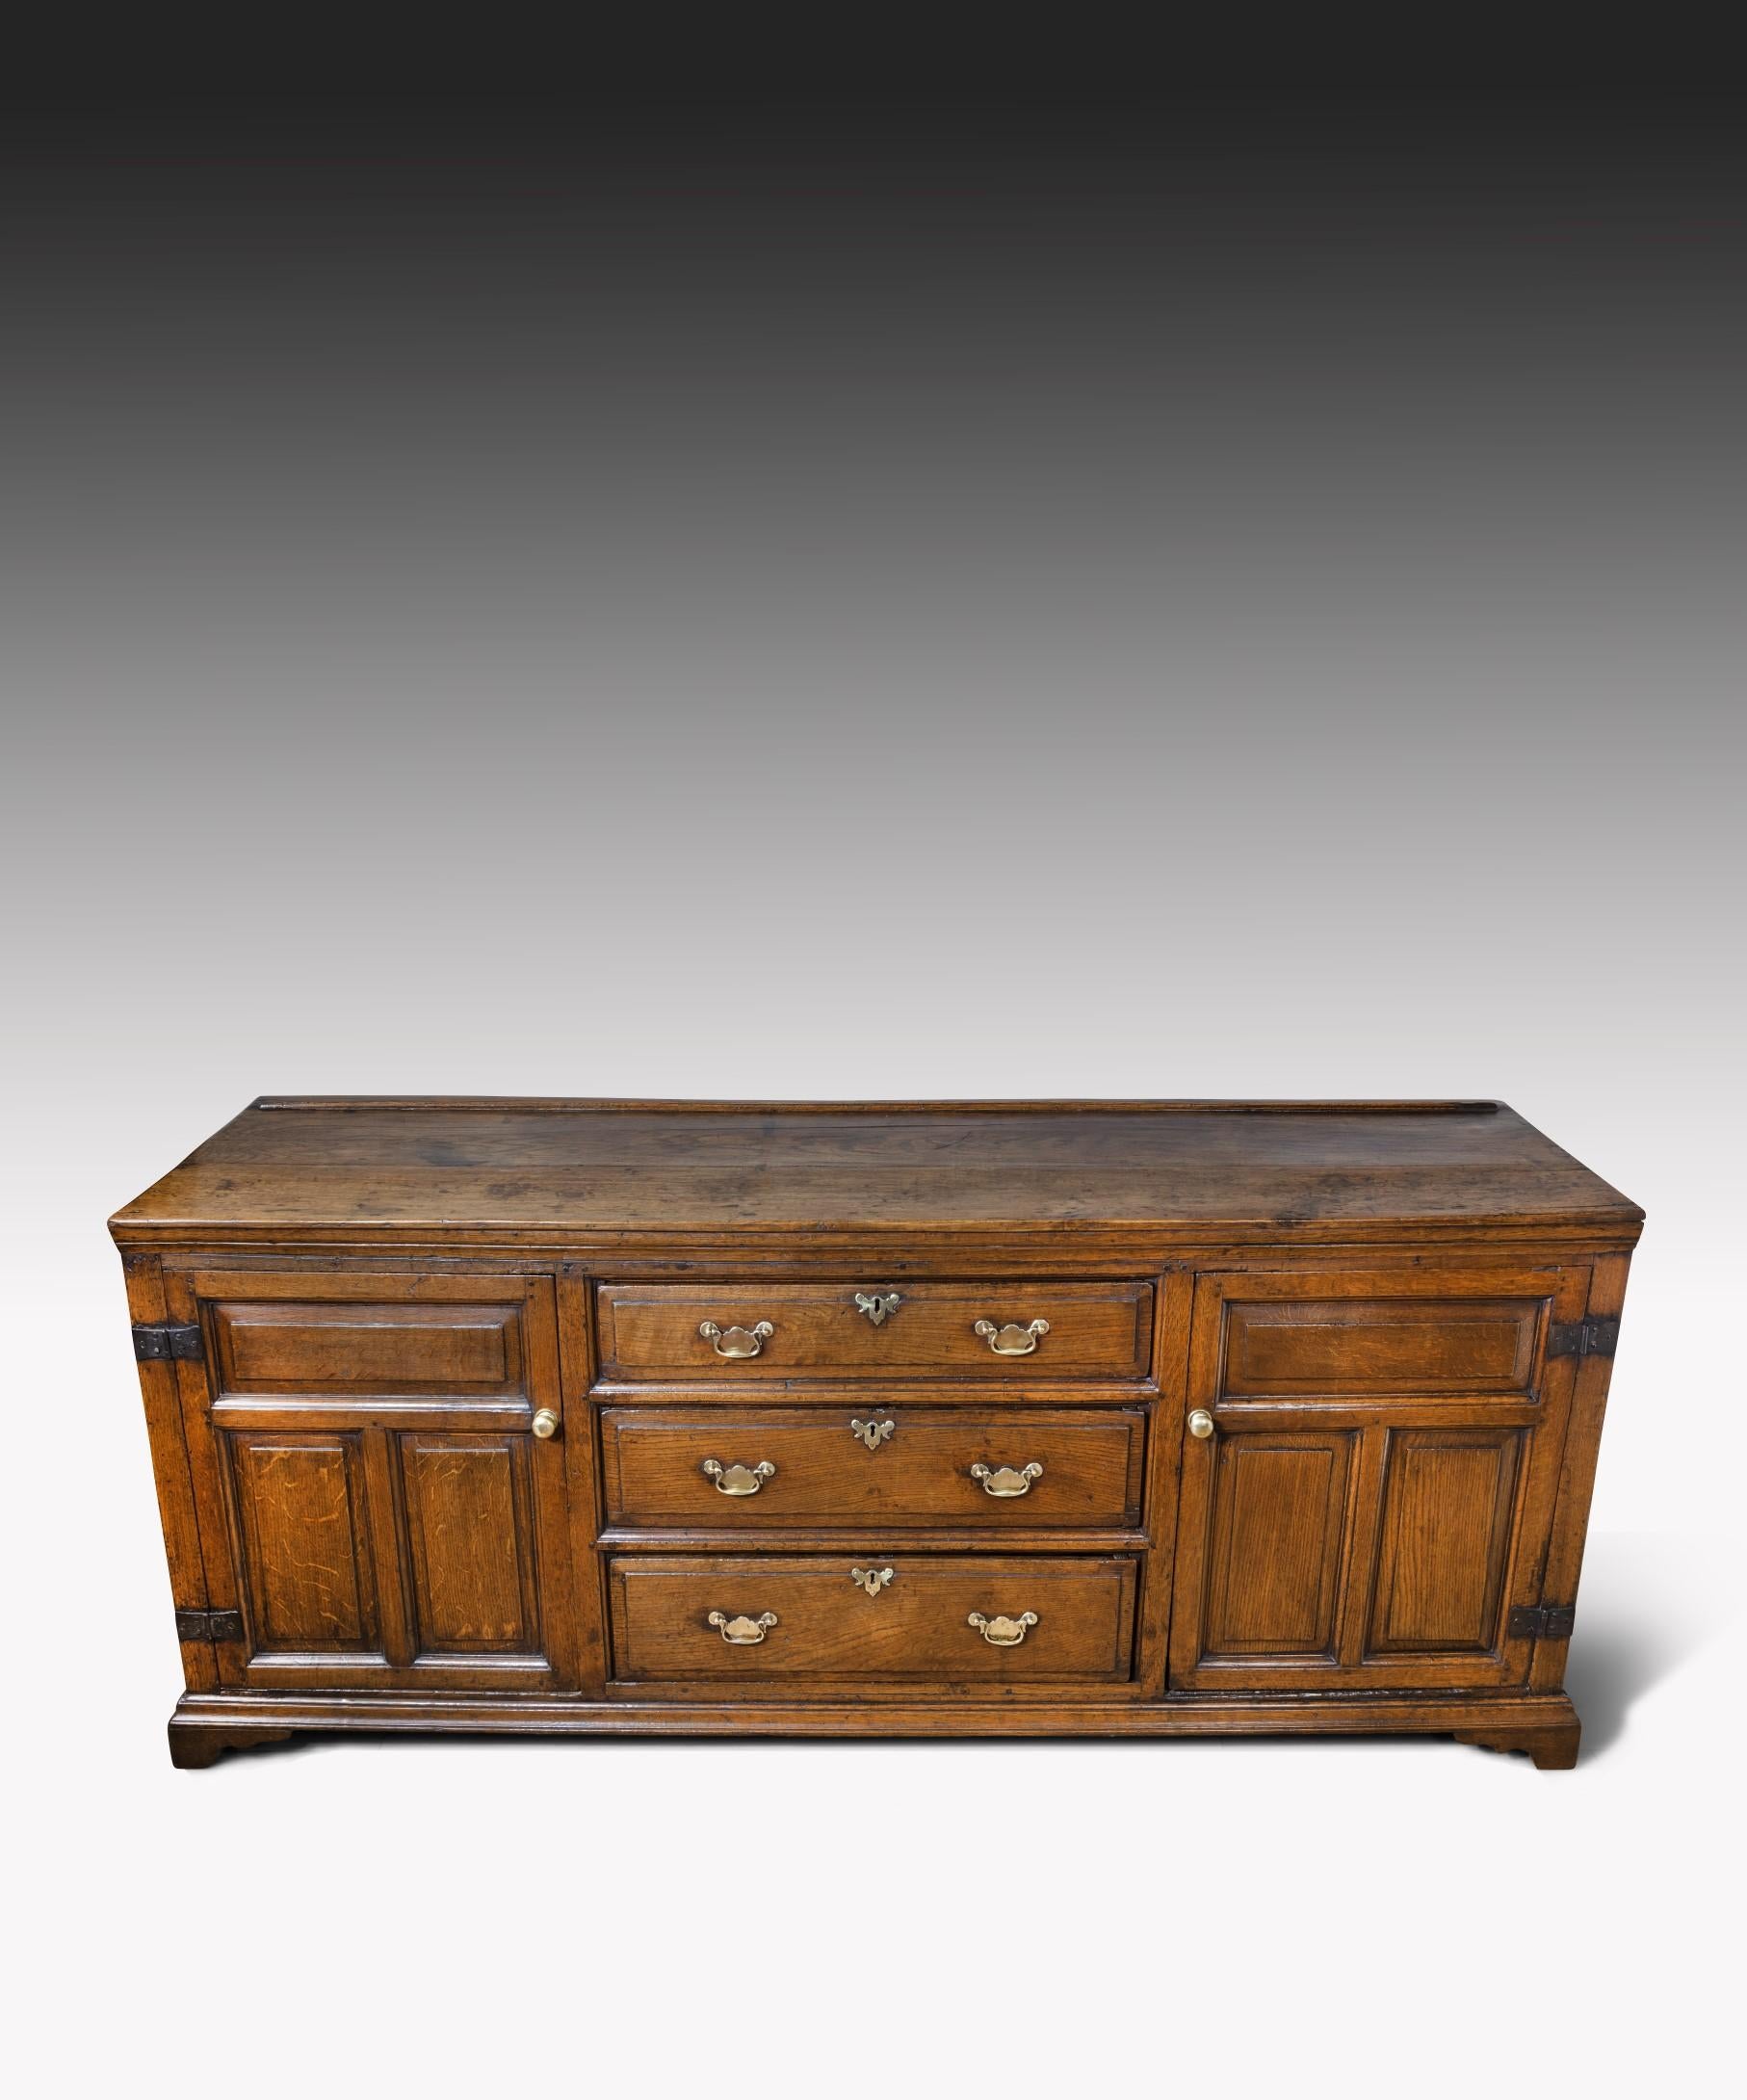 An 18th century Georgian oak dresser base; the oak dresser has three frieze drawers above a central bank of graduated drawers flanked by a panelled cupboard door to either side and is raised on the original bracket feet. The dresser's drawers have